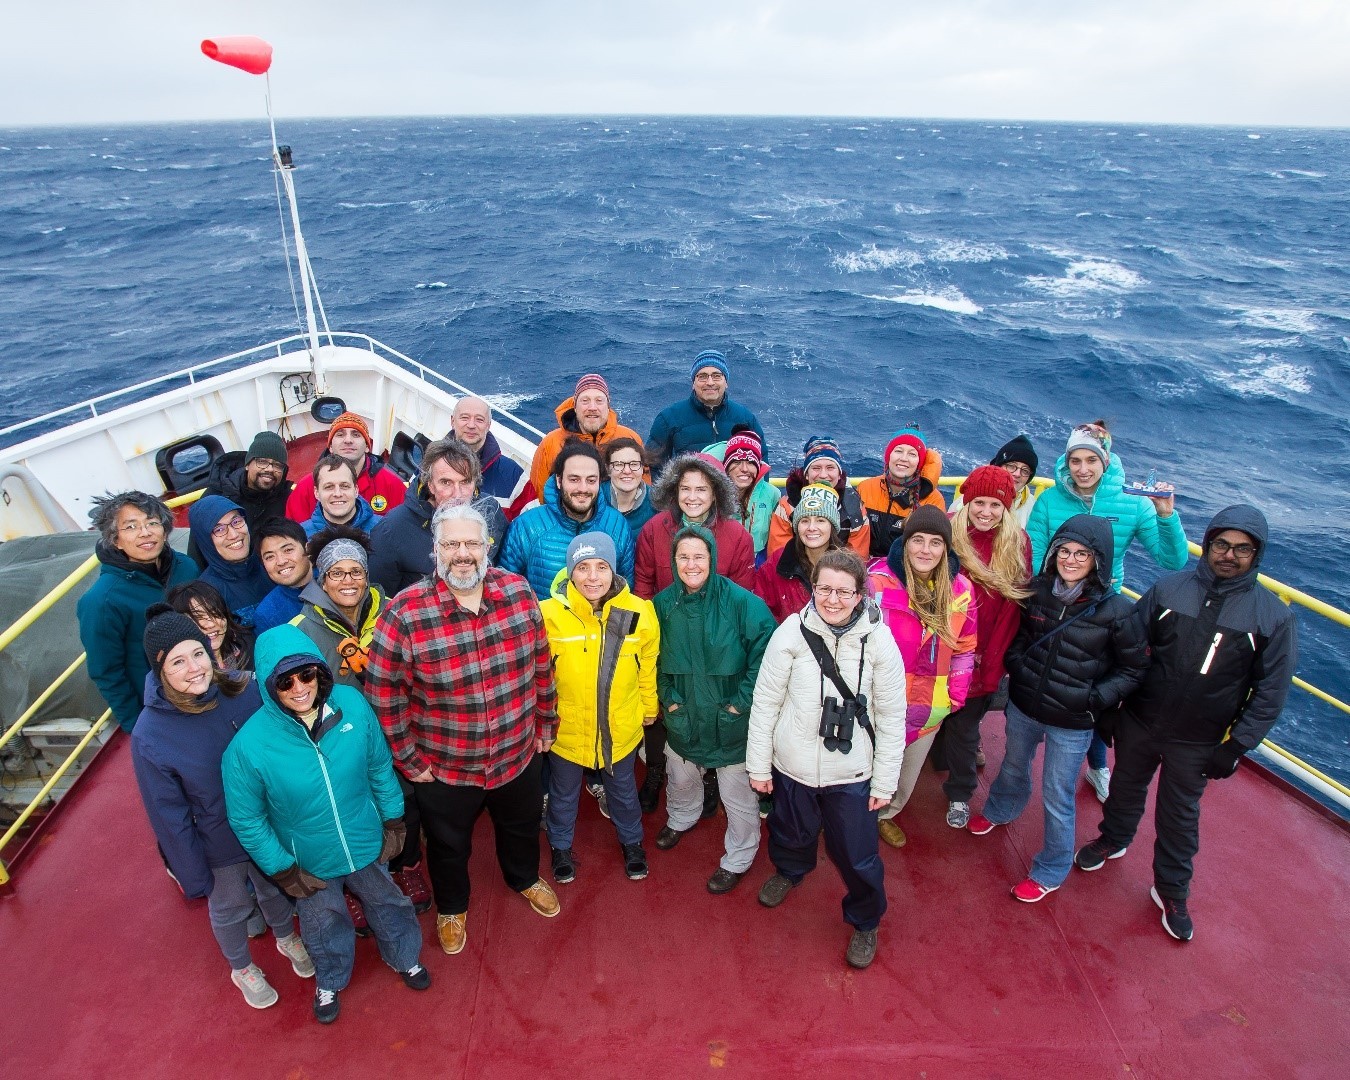 The JOIDES Resolution at sea during research project co-led by Columbia's Gisela Winckler